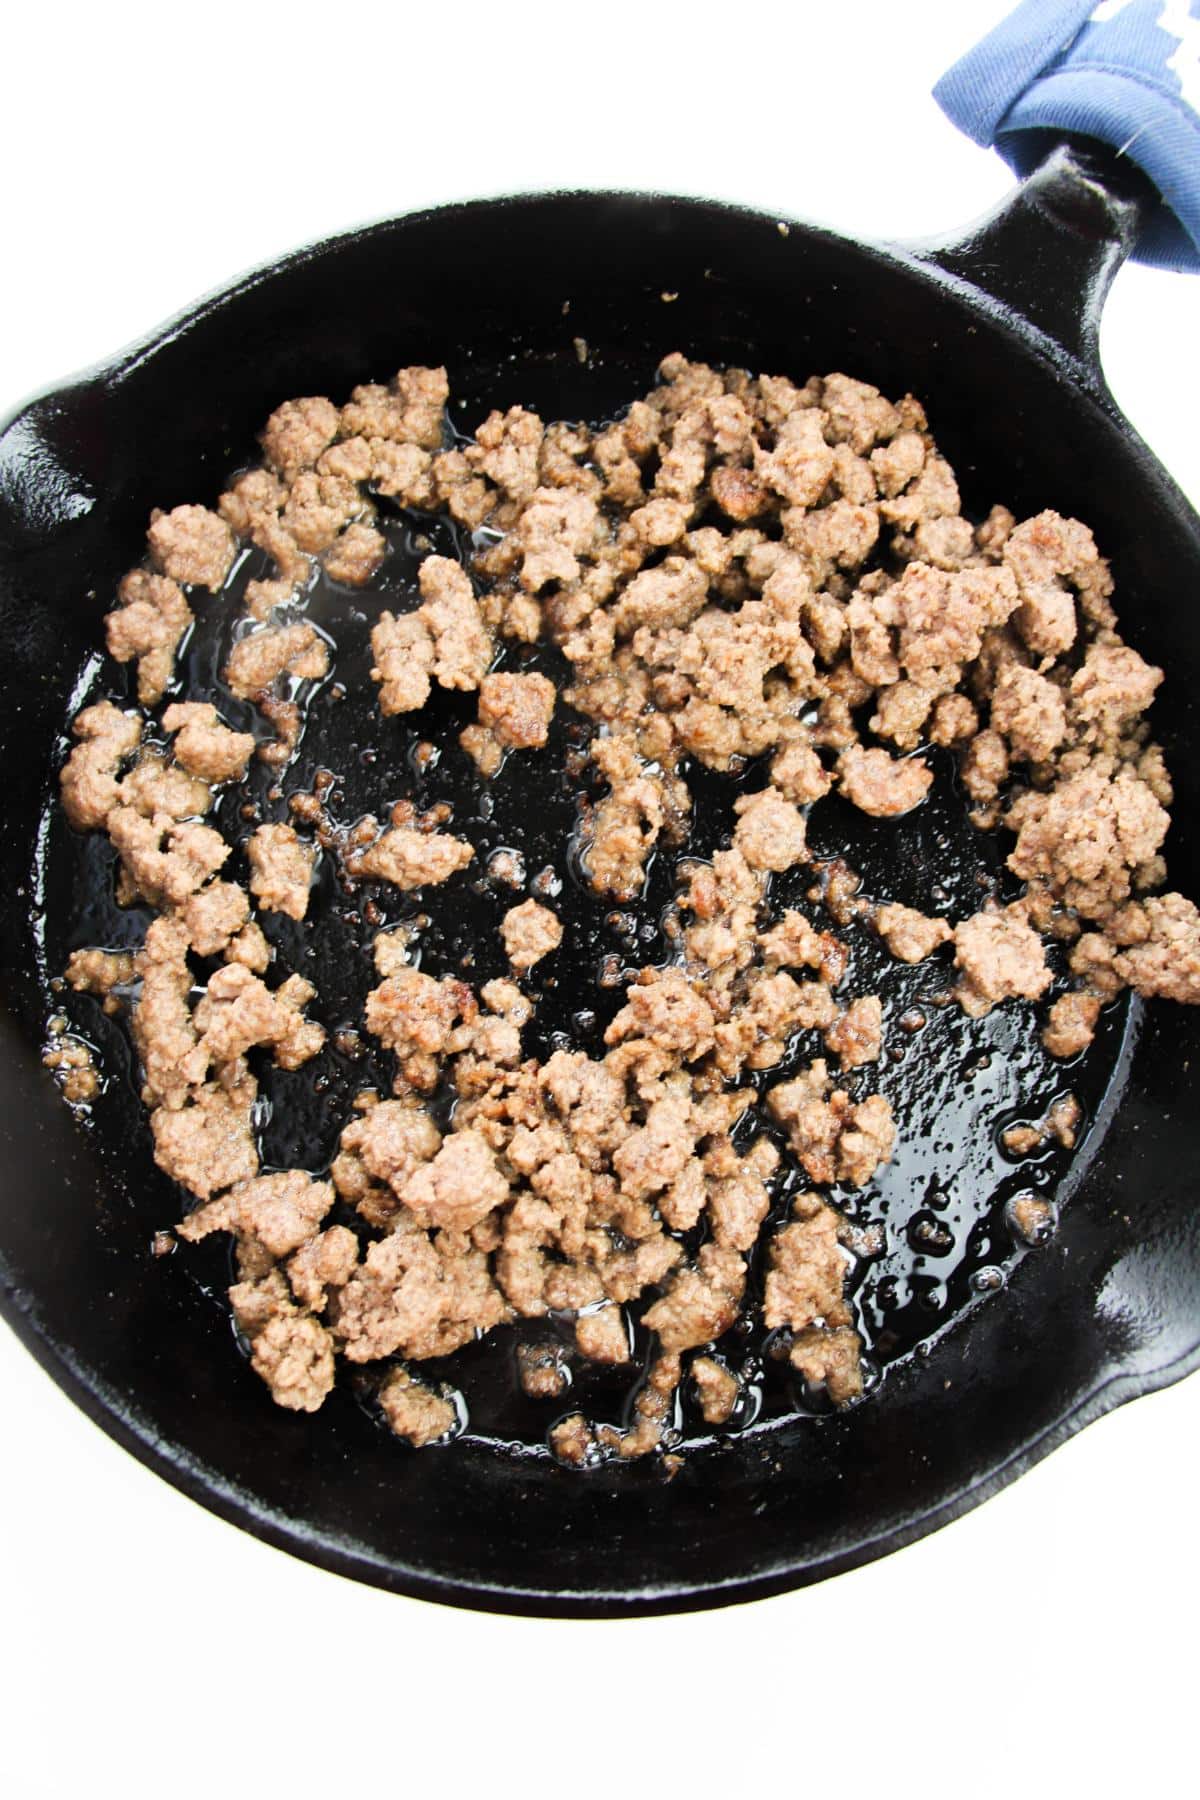 A cast iron frying pan with ground beef.